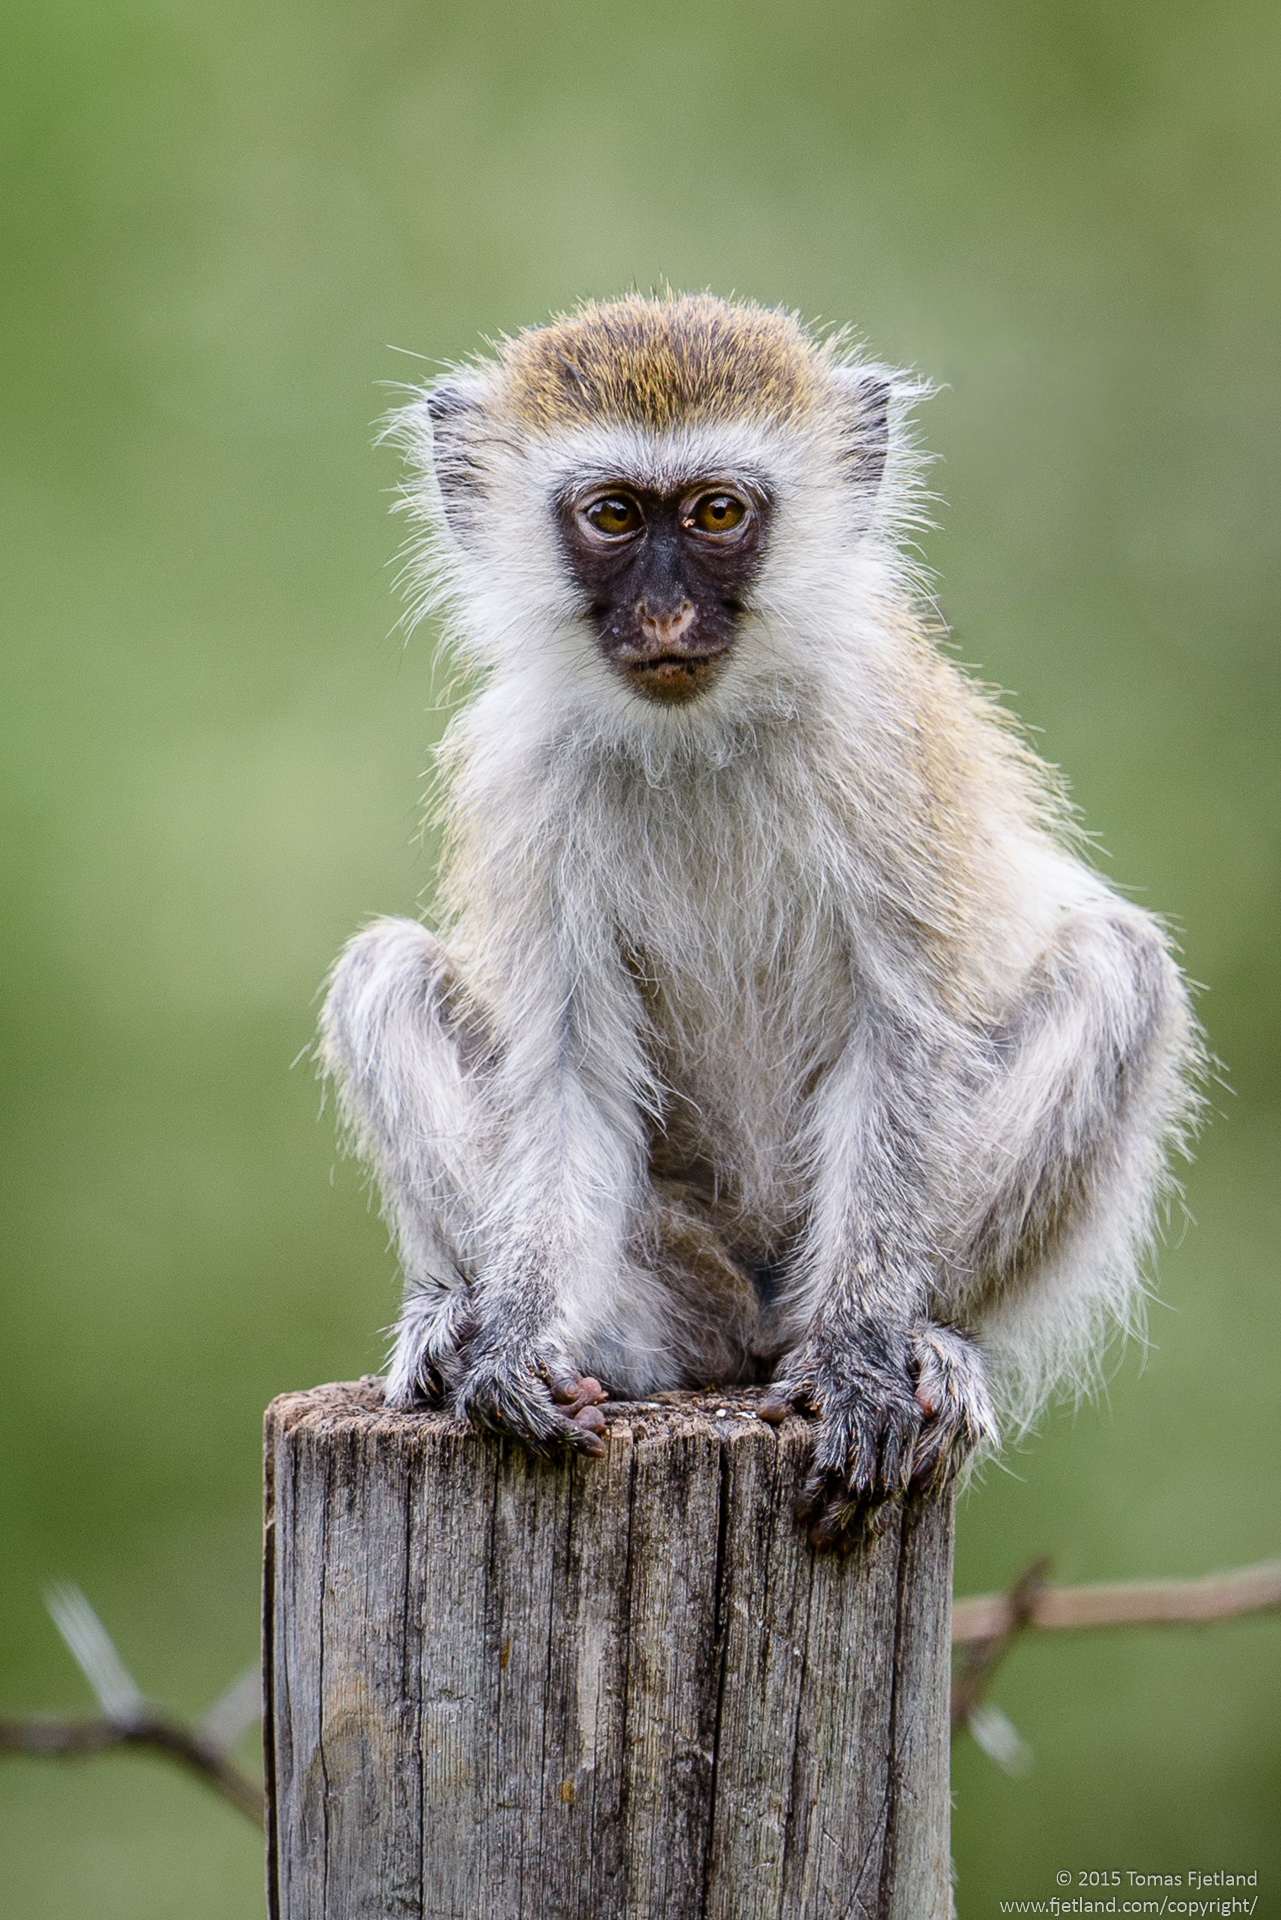 A young Vervet monkey posing on a fence post next to the camps pool